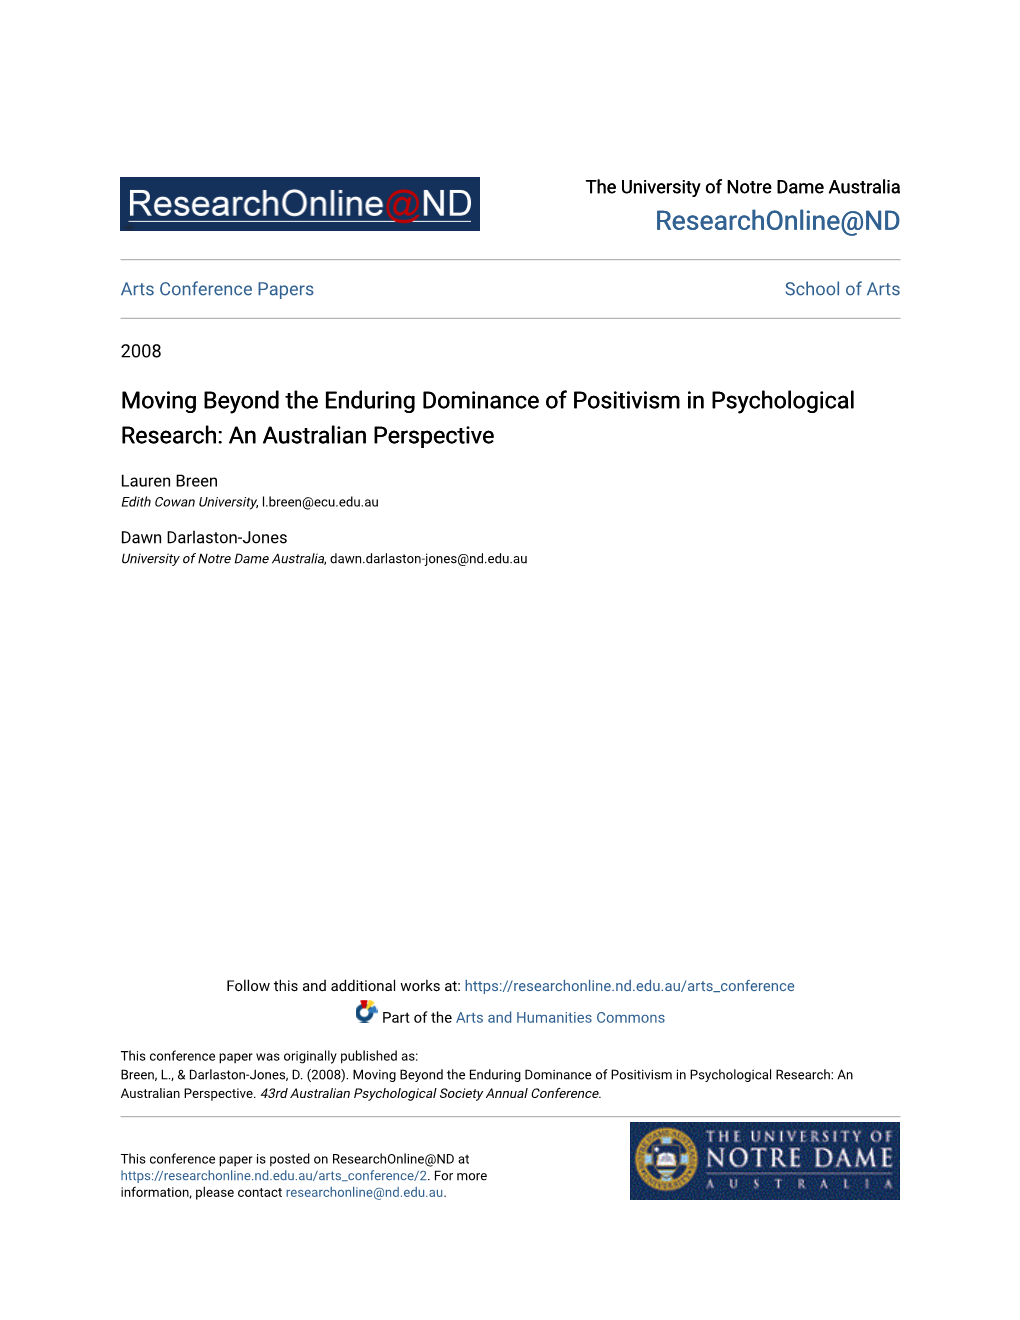 Moving Beyond the Enduring Dominance of Positivism in Psychological Research: an Australian Perspective